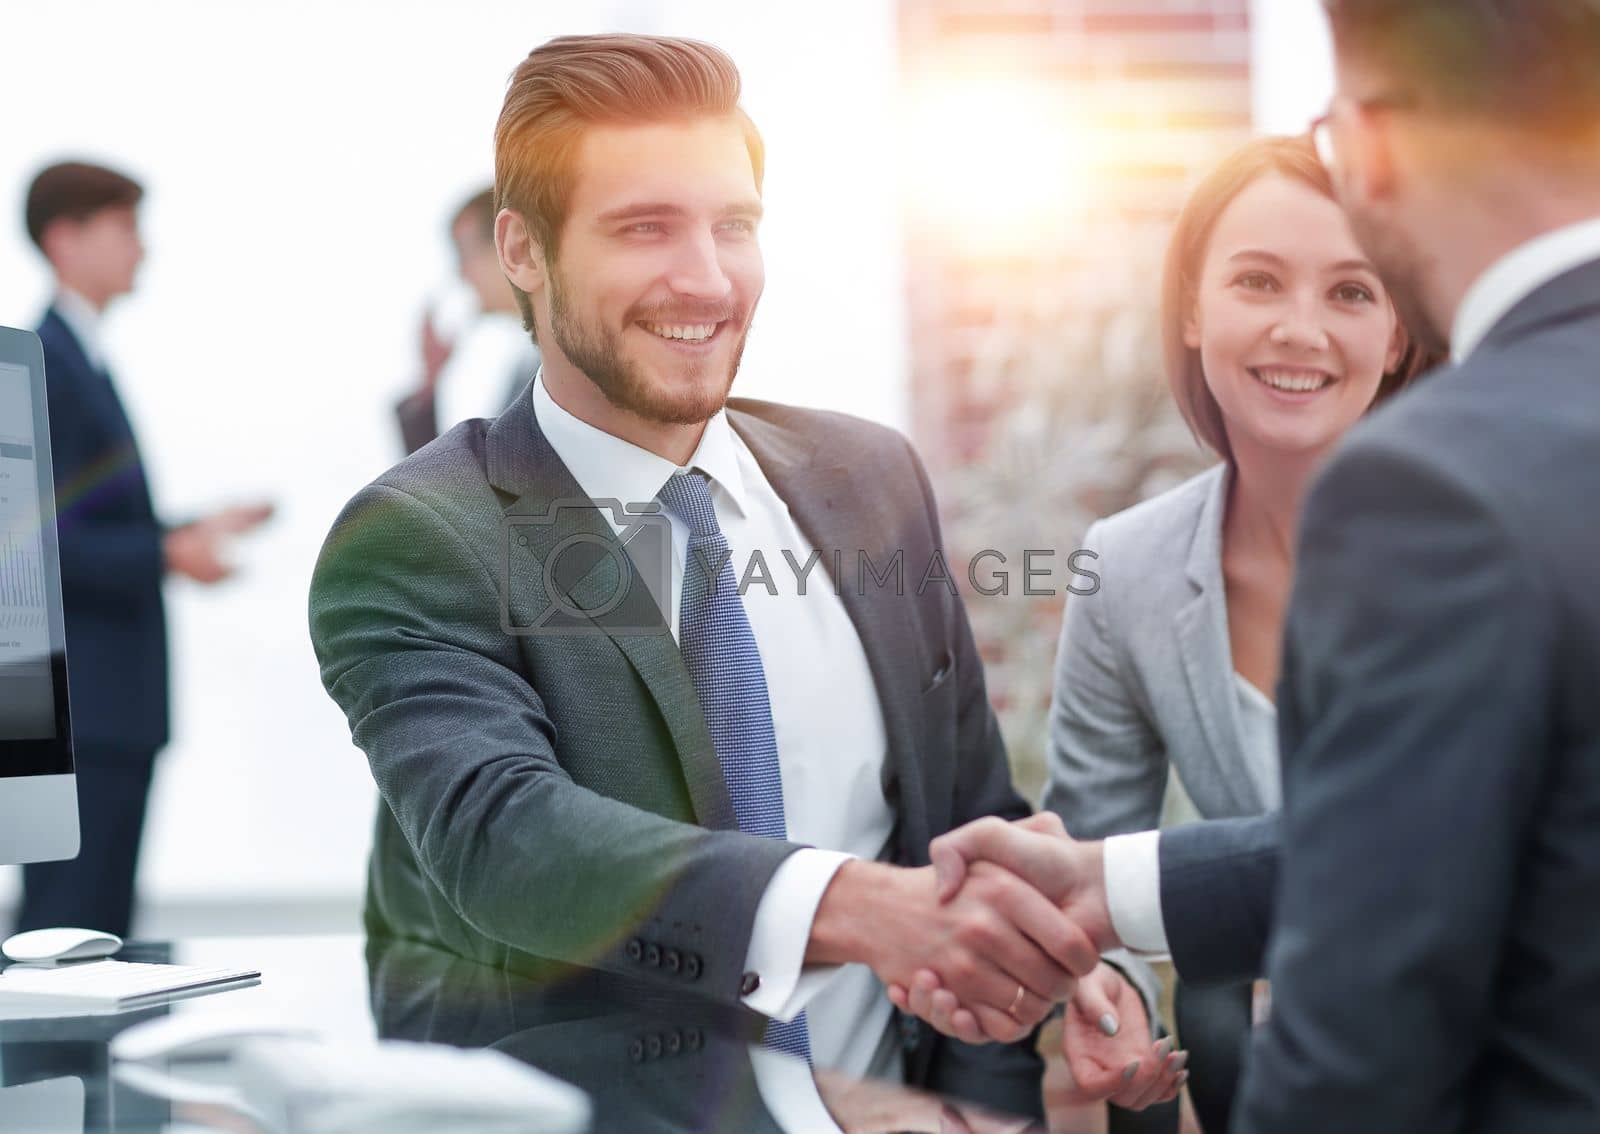 Royalty free image of happy man introducing businesswoman to business partners by asdf